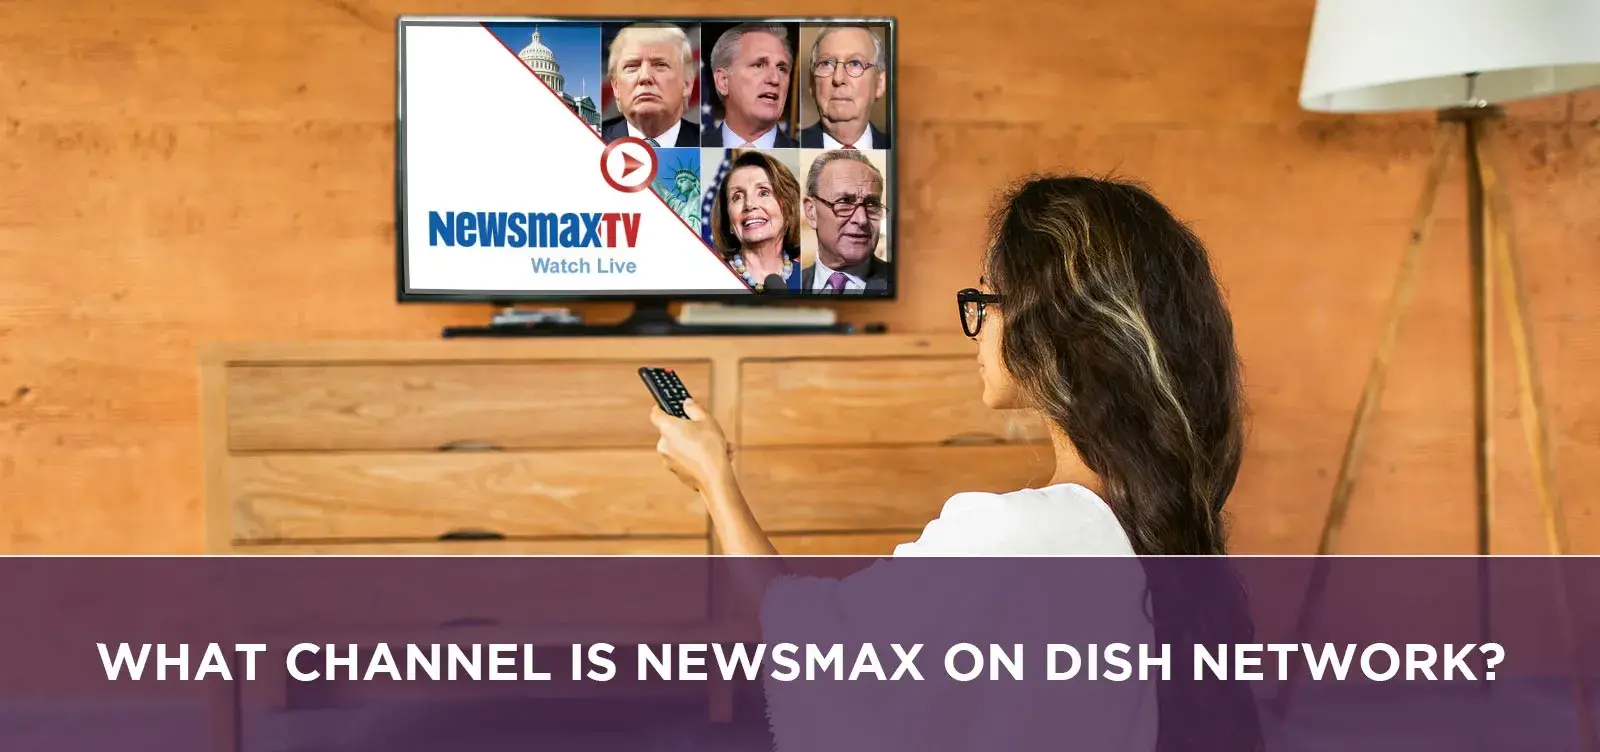 What channel is newsmax on dish network